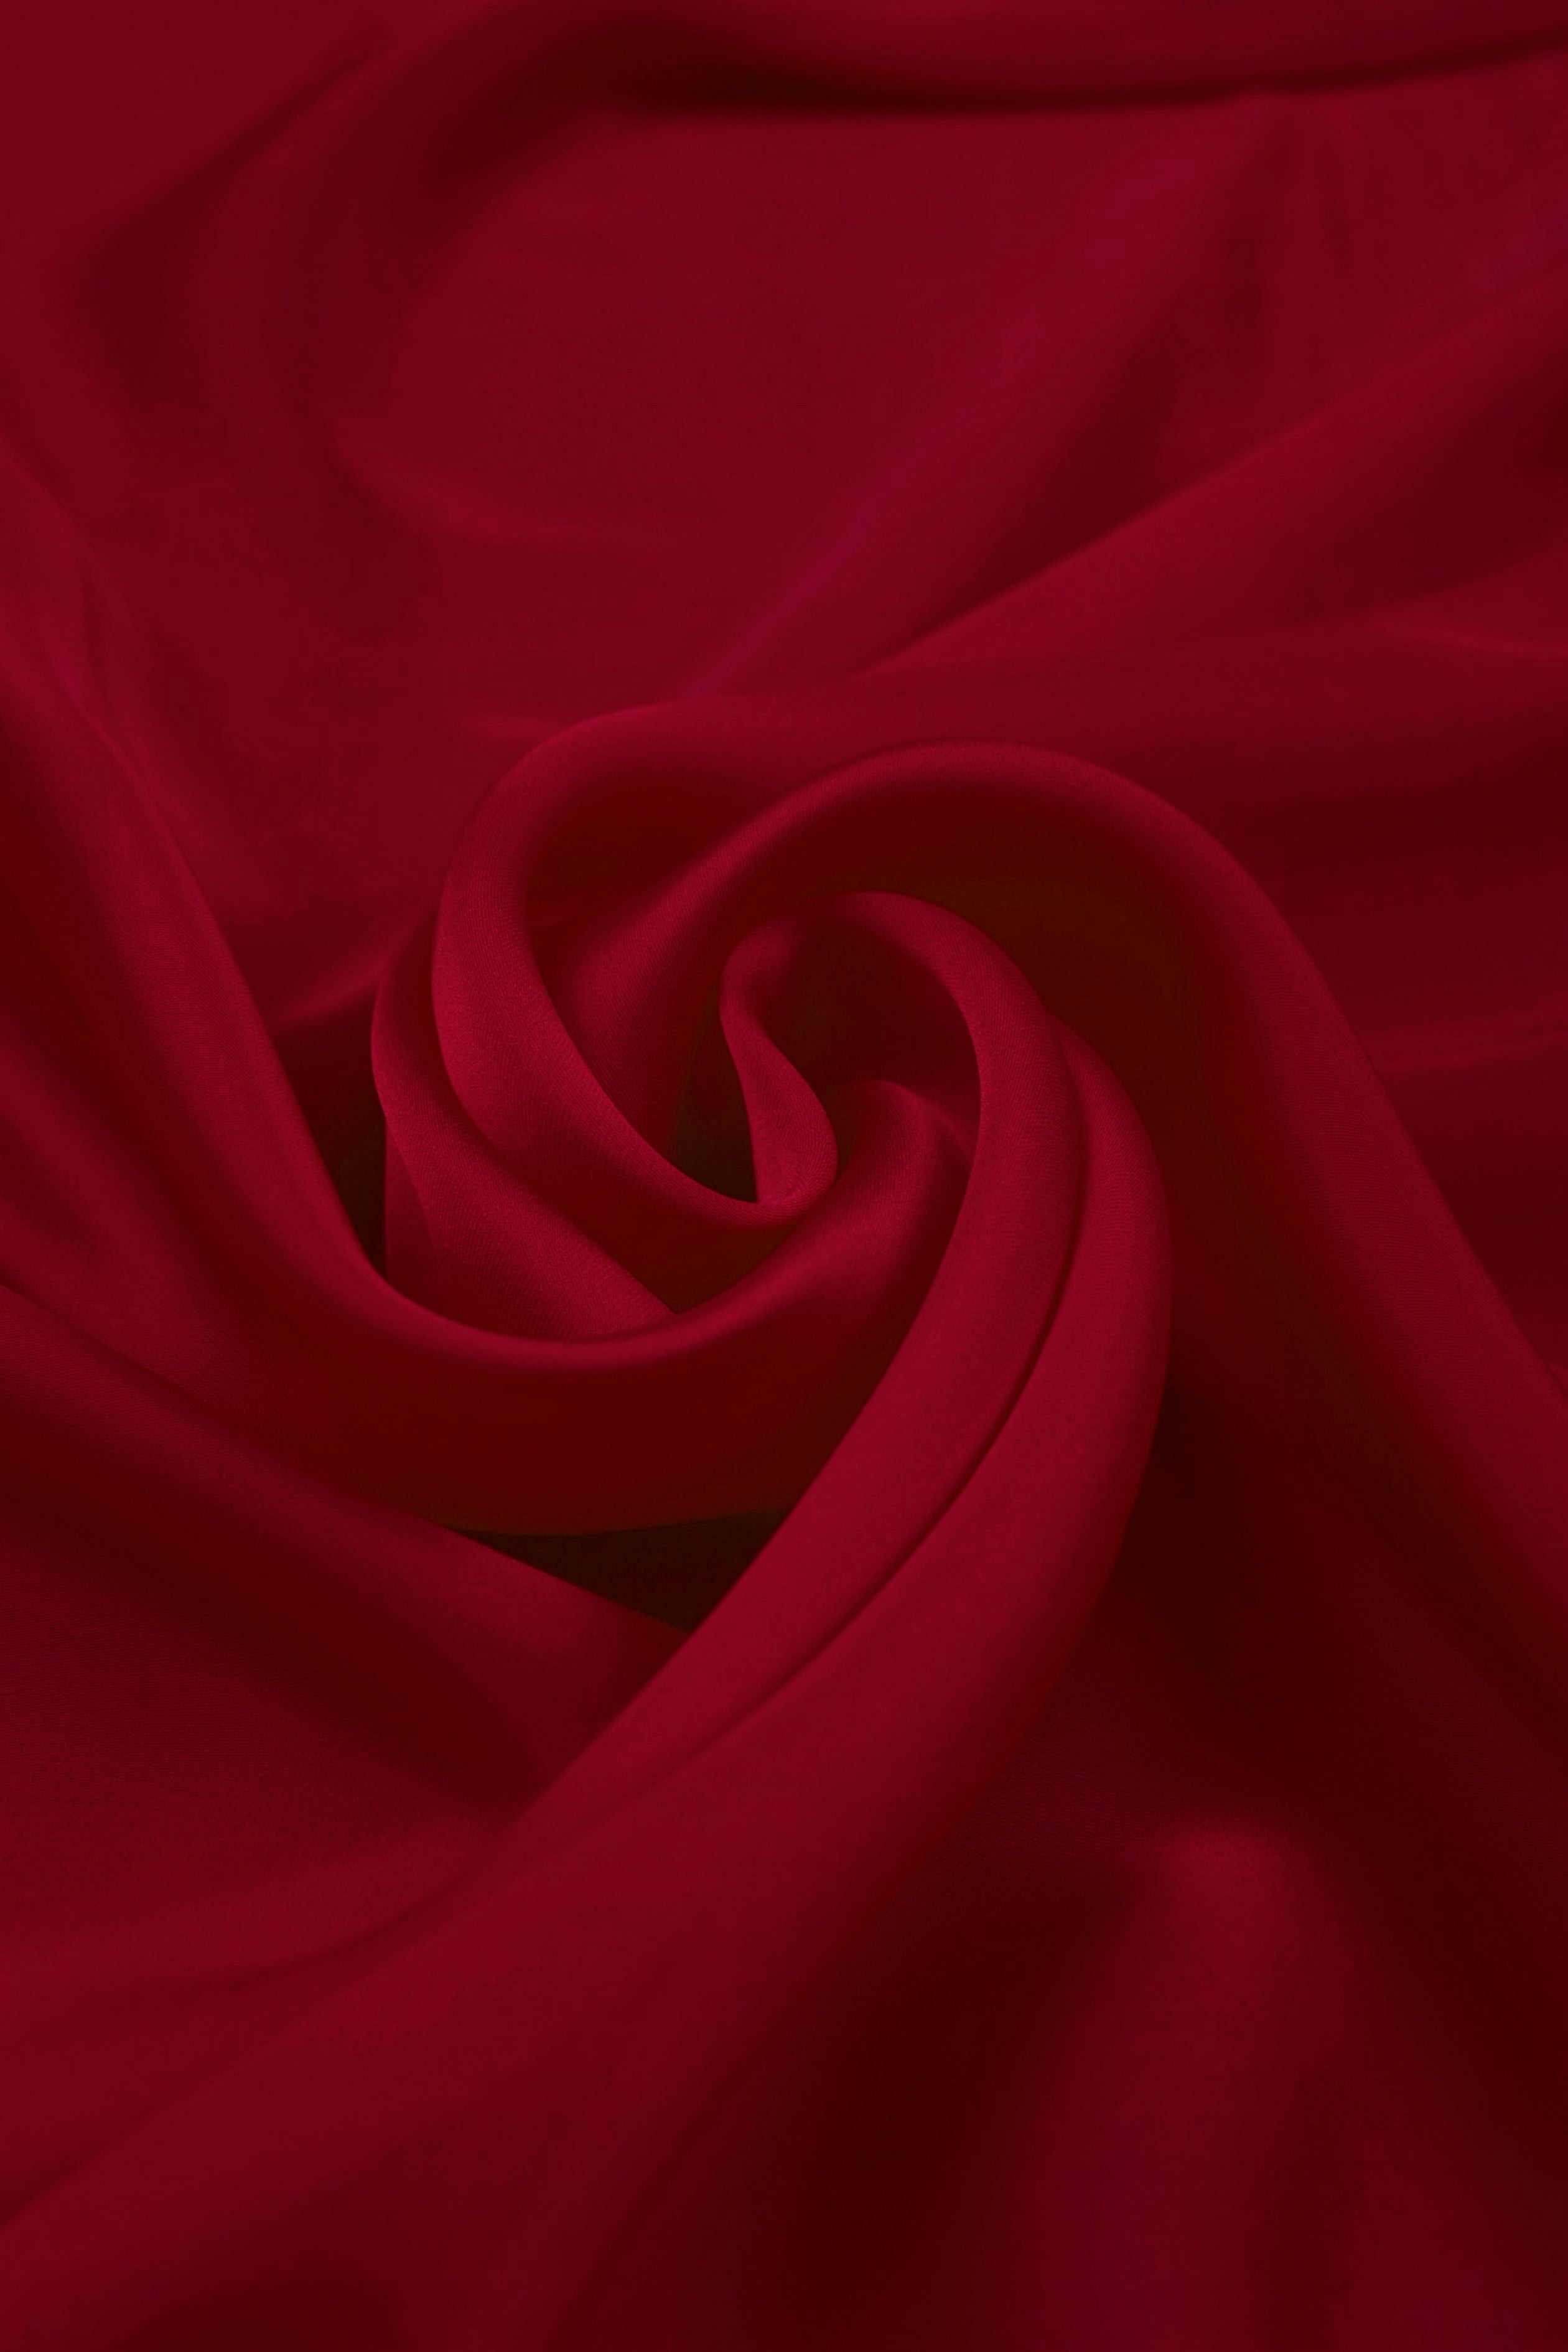 Maroon Plain Dyed Satin Georgette Fabric